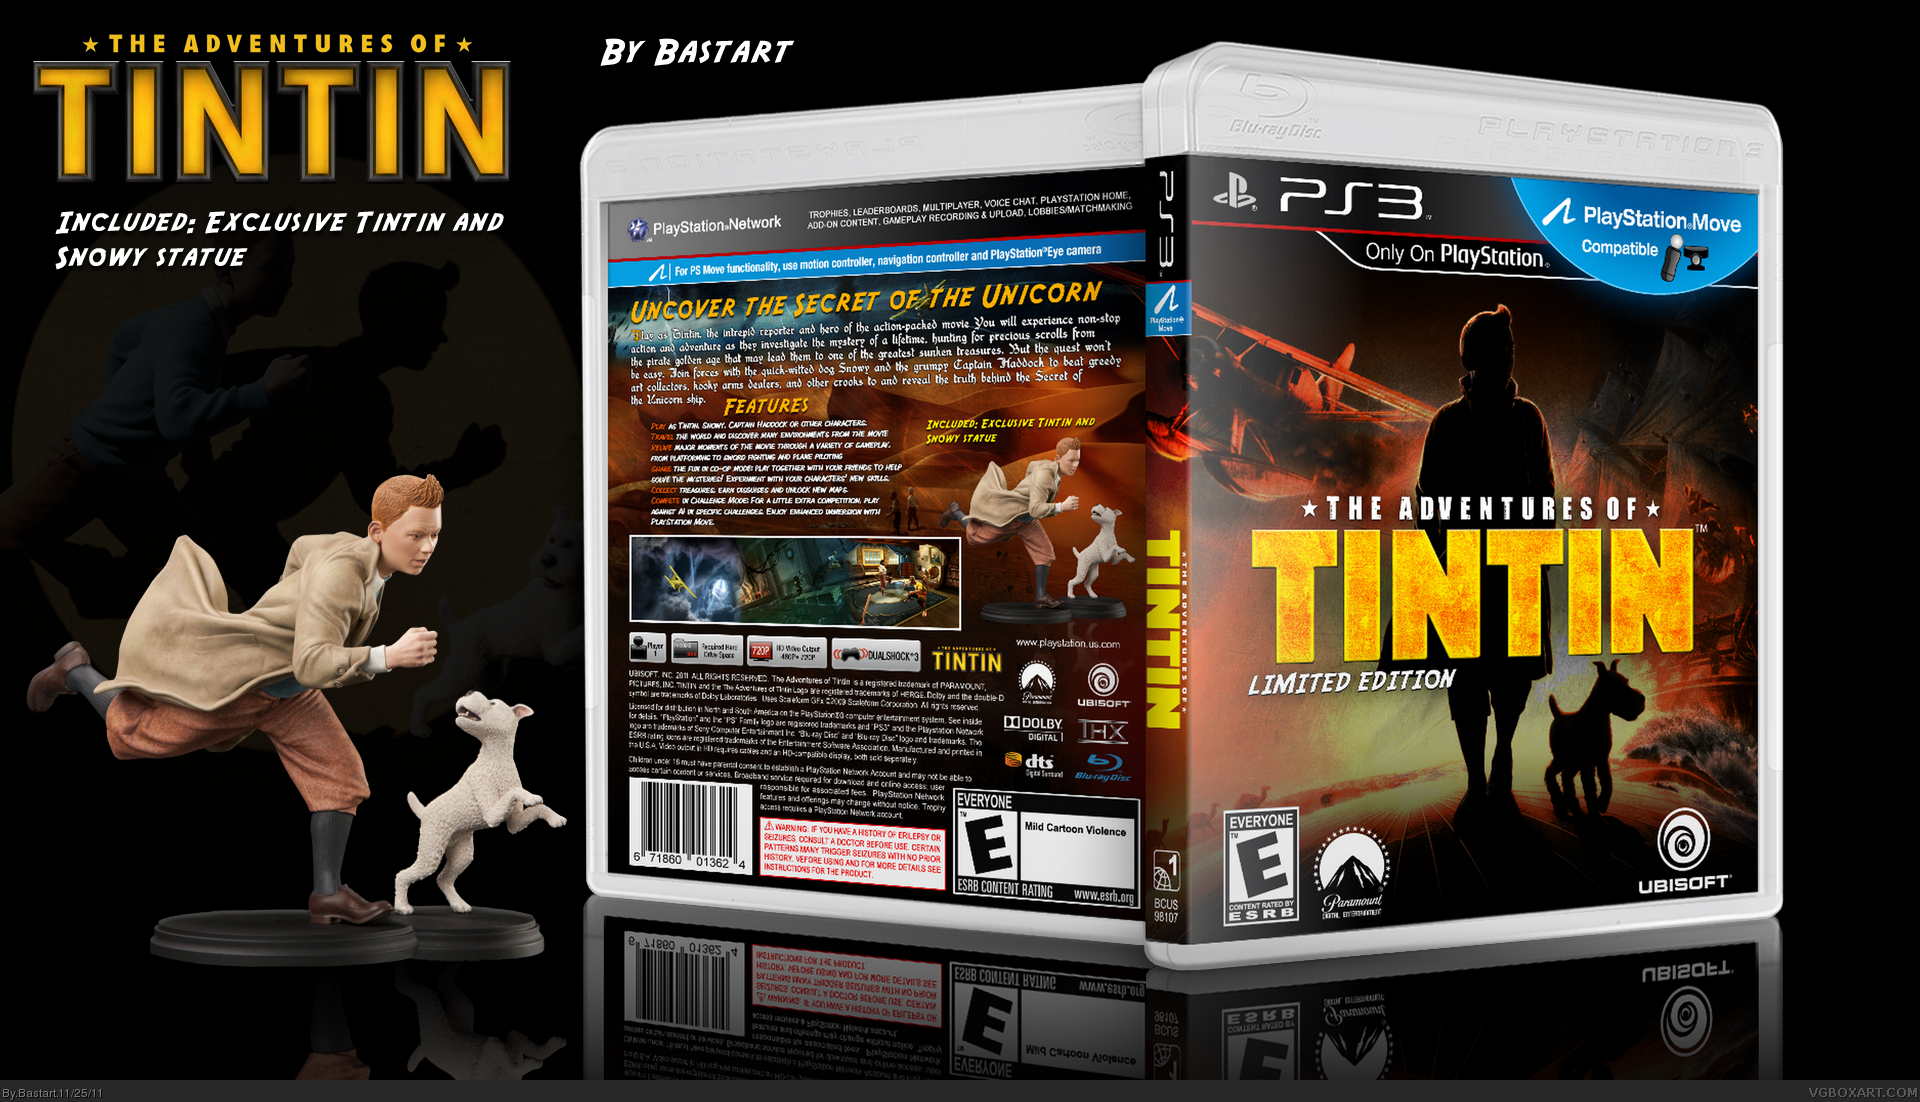 The Adventures of Tintin (Limited Edition) box cover